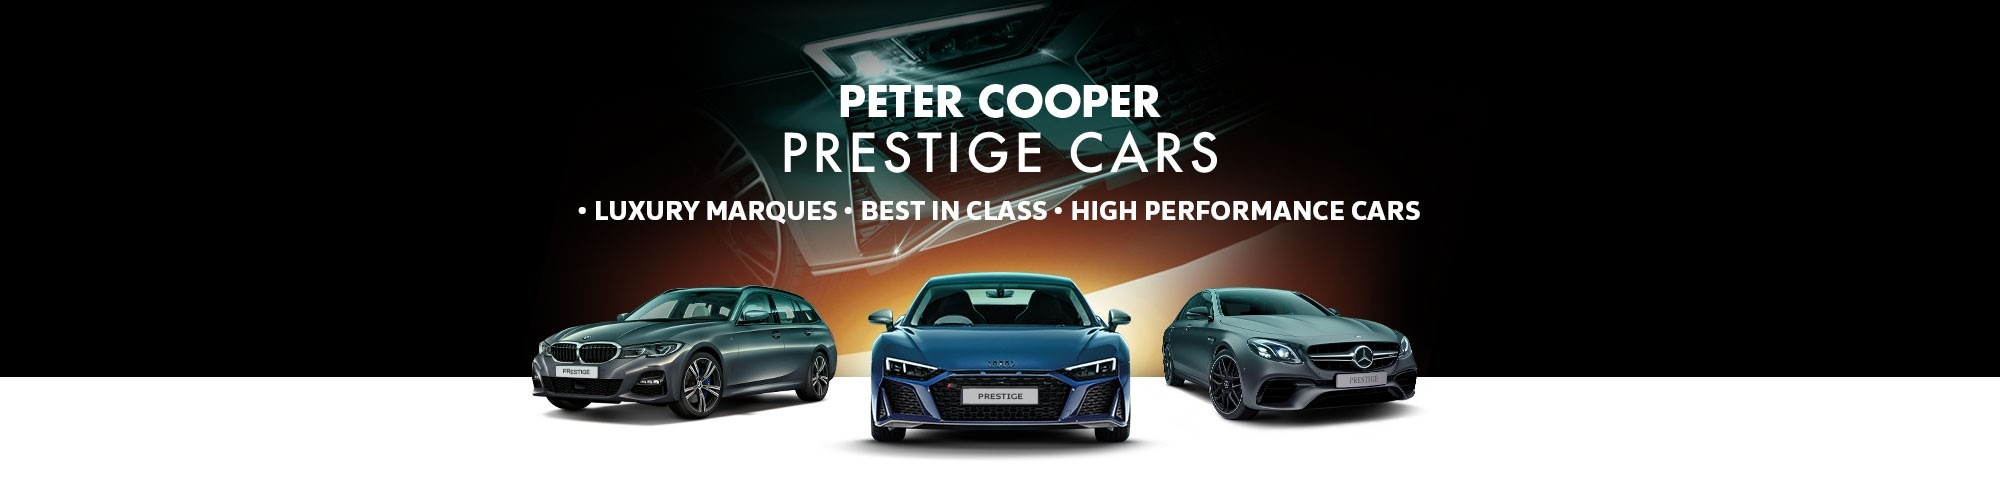 About Prestige Cars